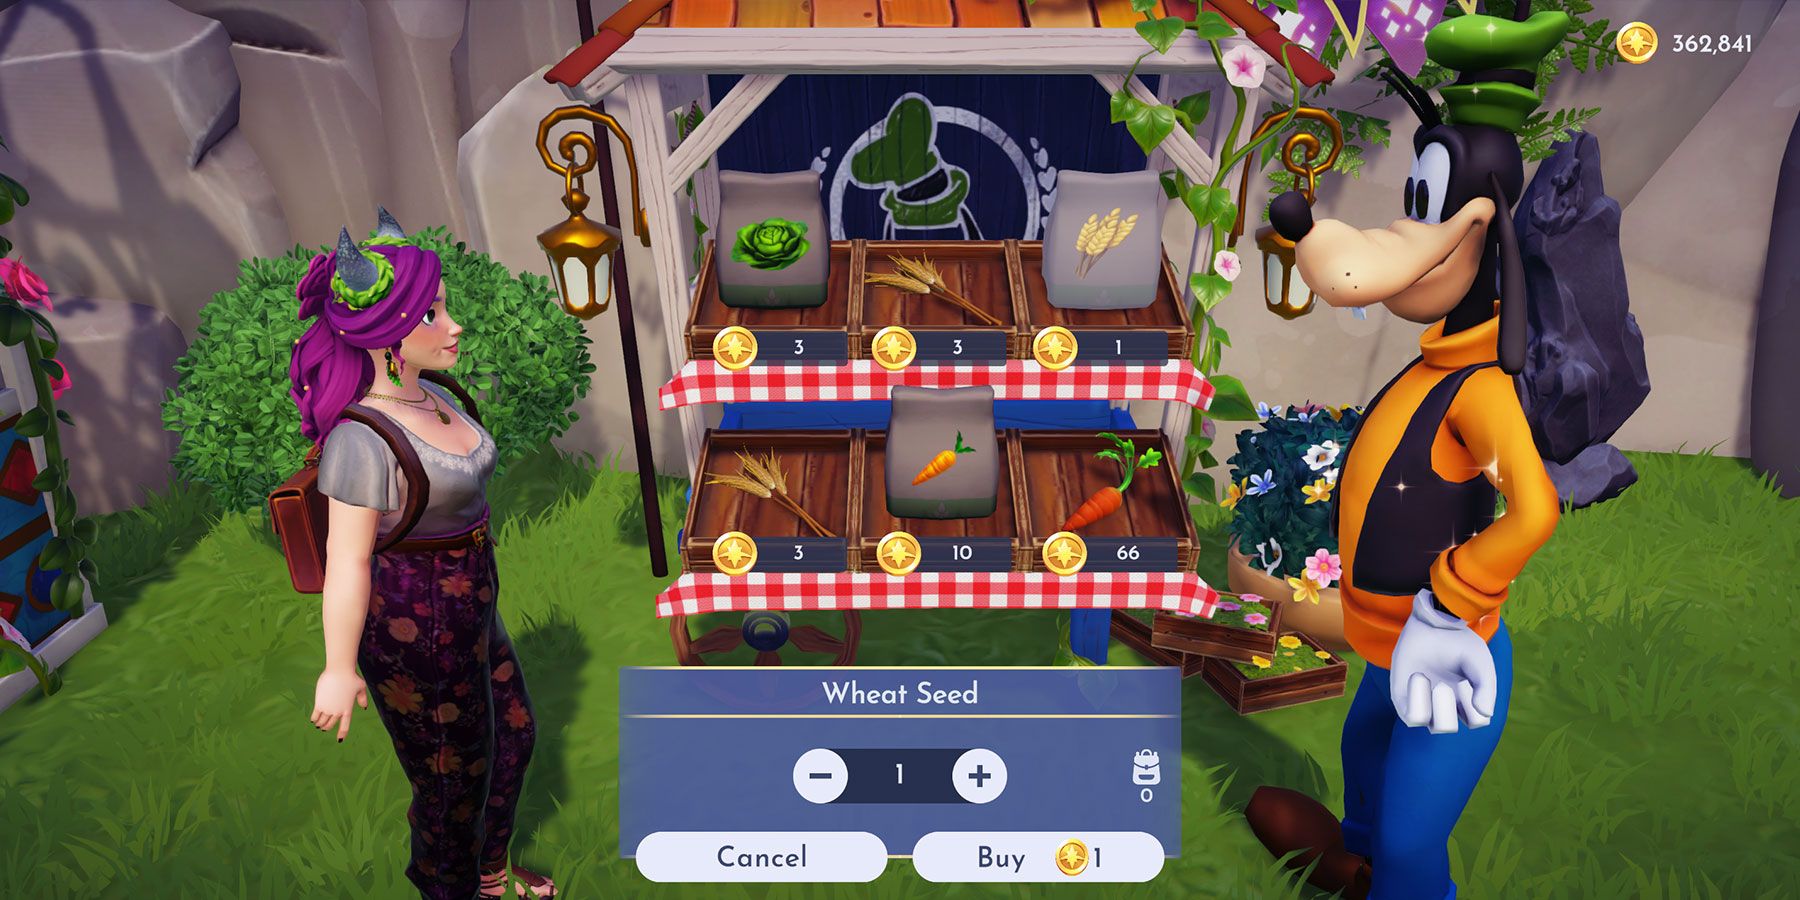 Buying Wheat Seeds or Wheat cooking ingredient from Goofy's Stall in Disney Dreamlight Valley